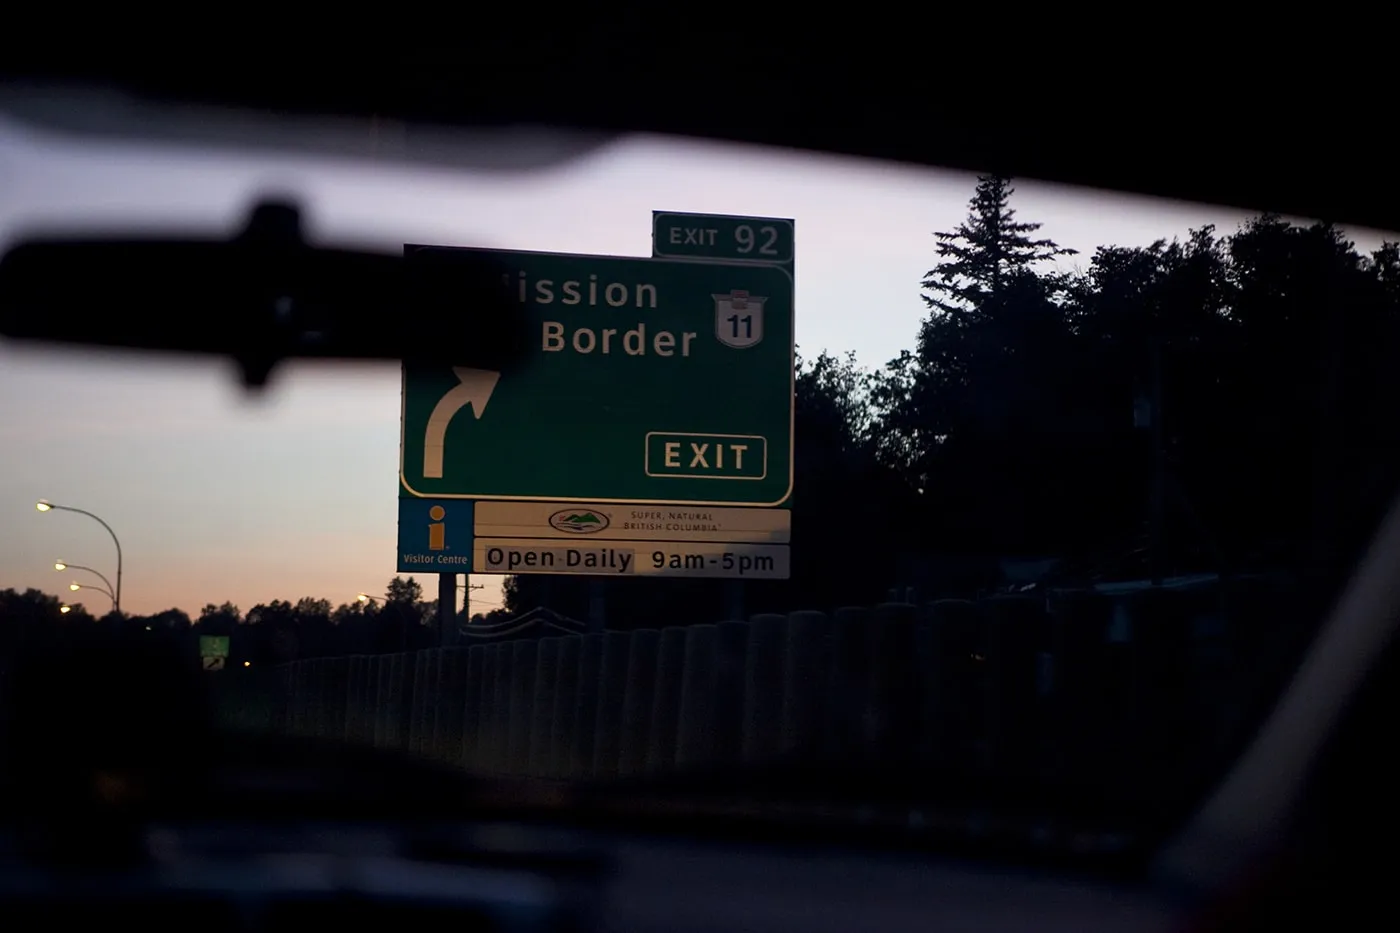 Canadian Road Trip: Crossing back into the U.S.